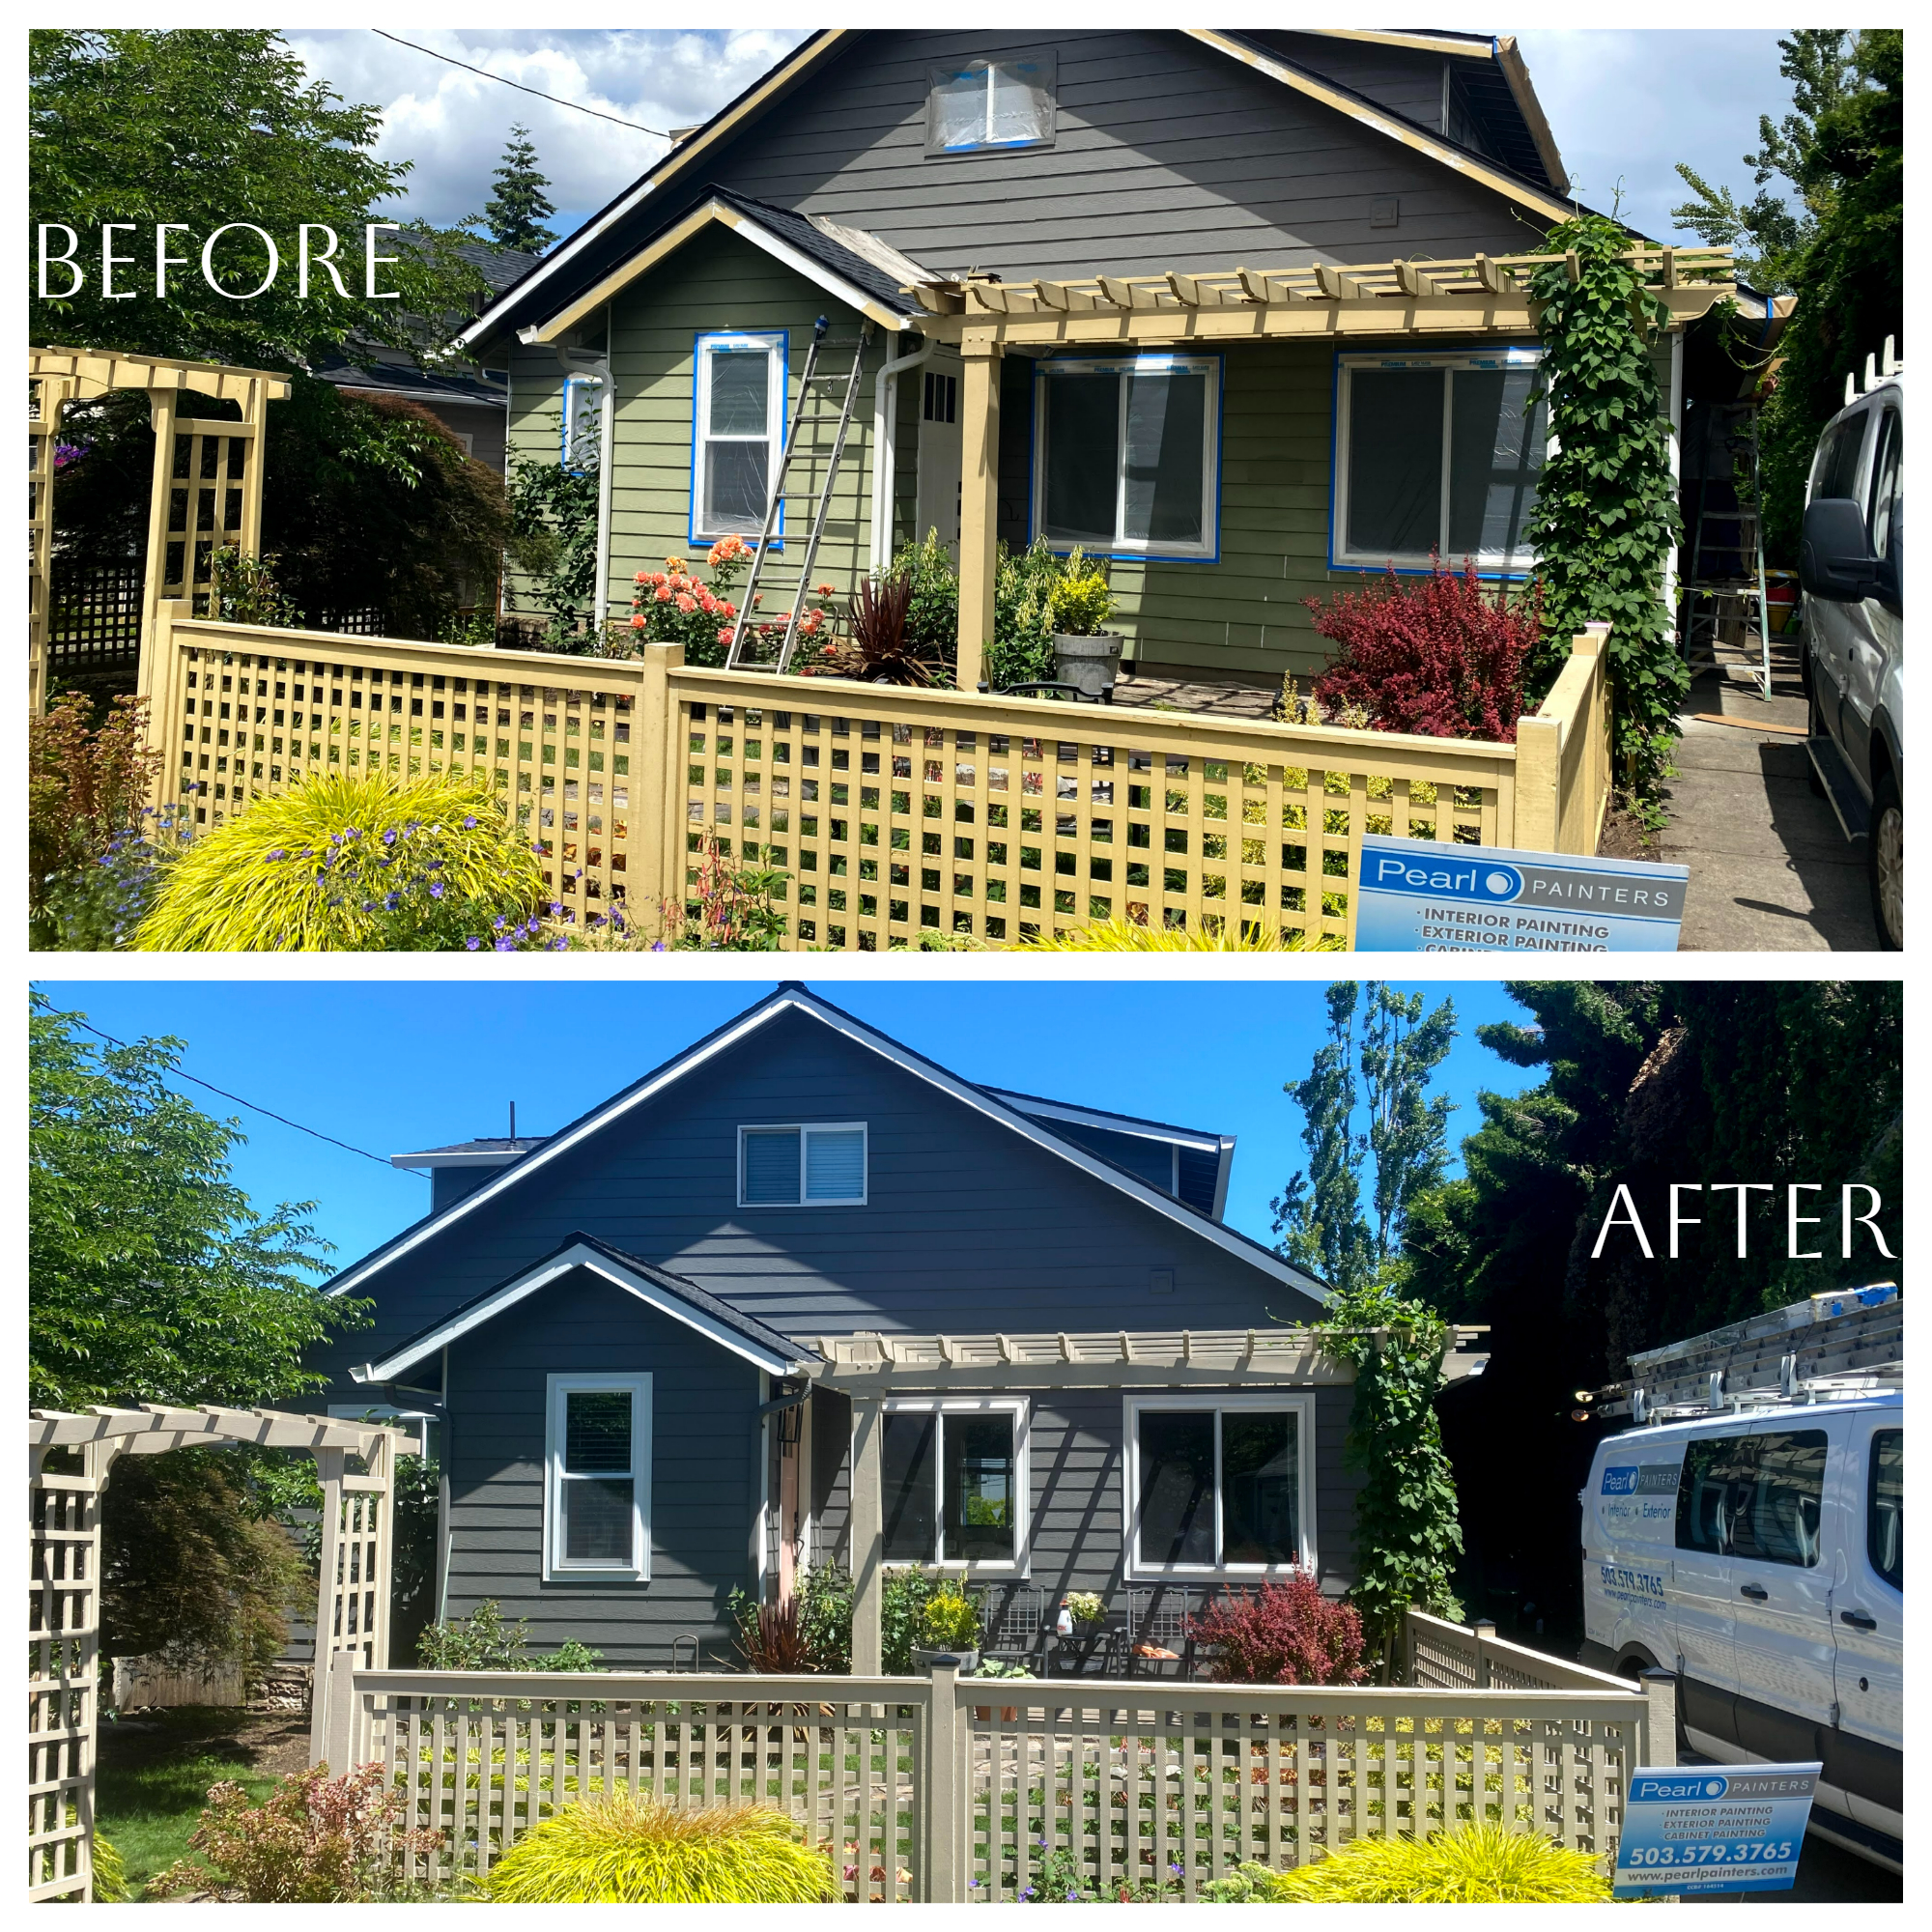 Before and after pictures showcasing the secure transformation of a house.